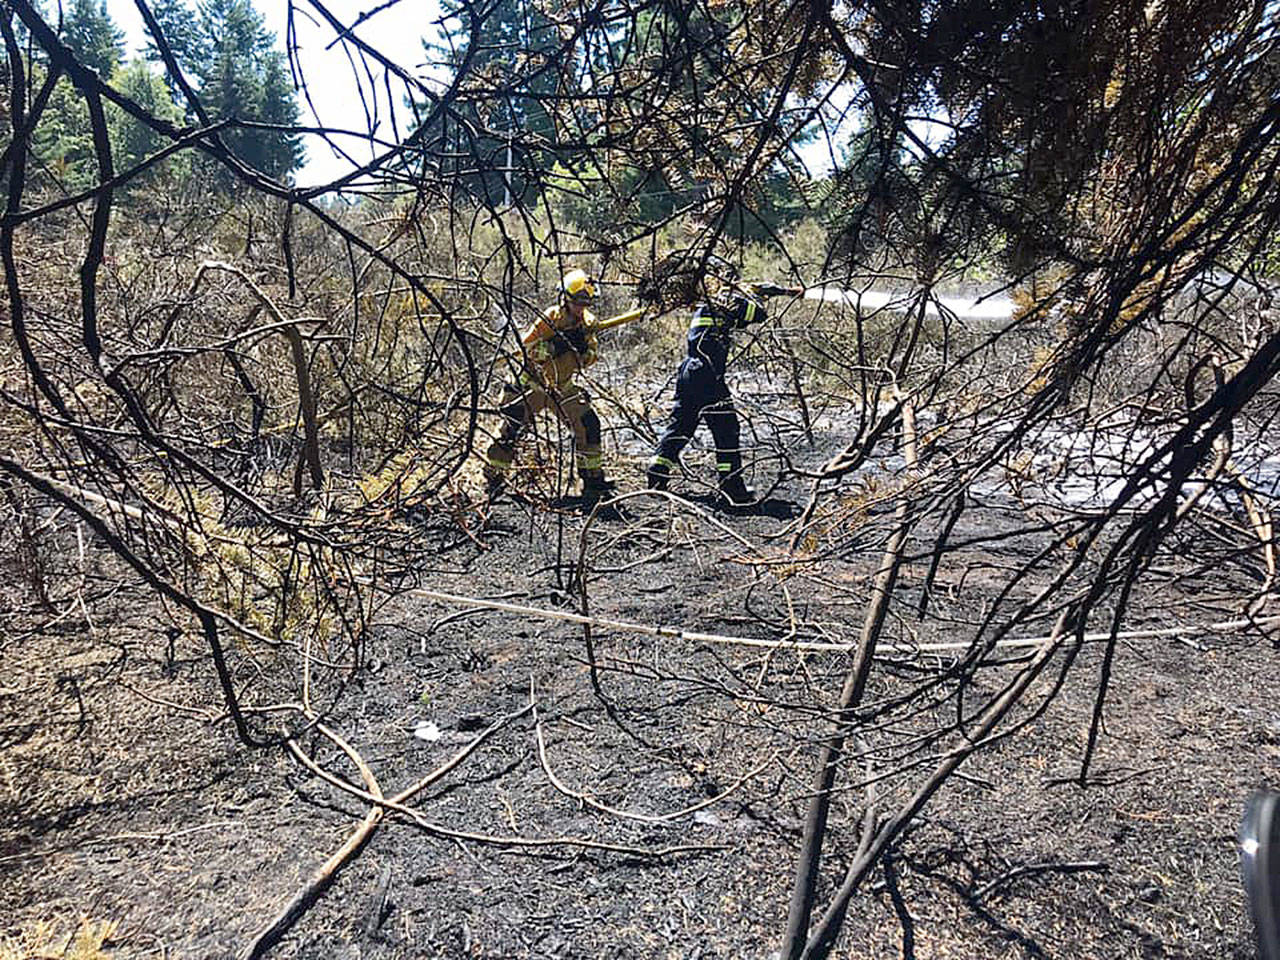 South Whidbey Fire/EMS firefighters extinguish a brush fire near Humphrey Road last week. Photo provided